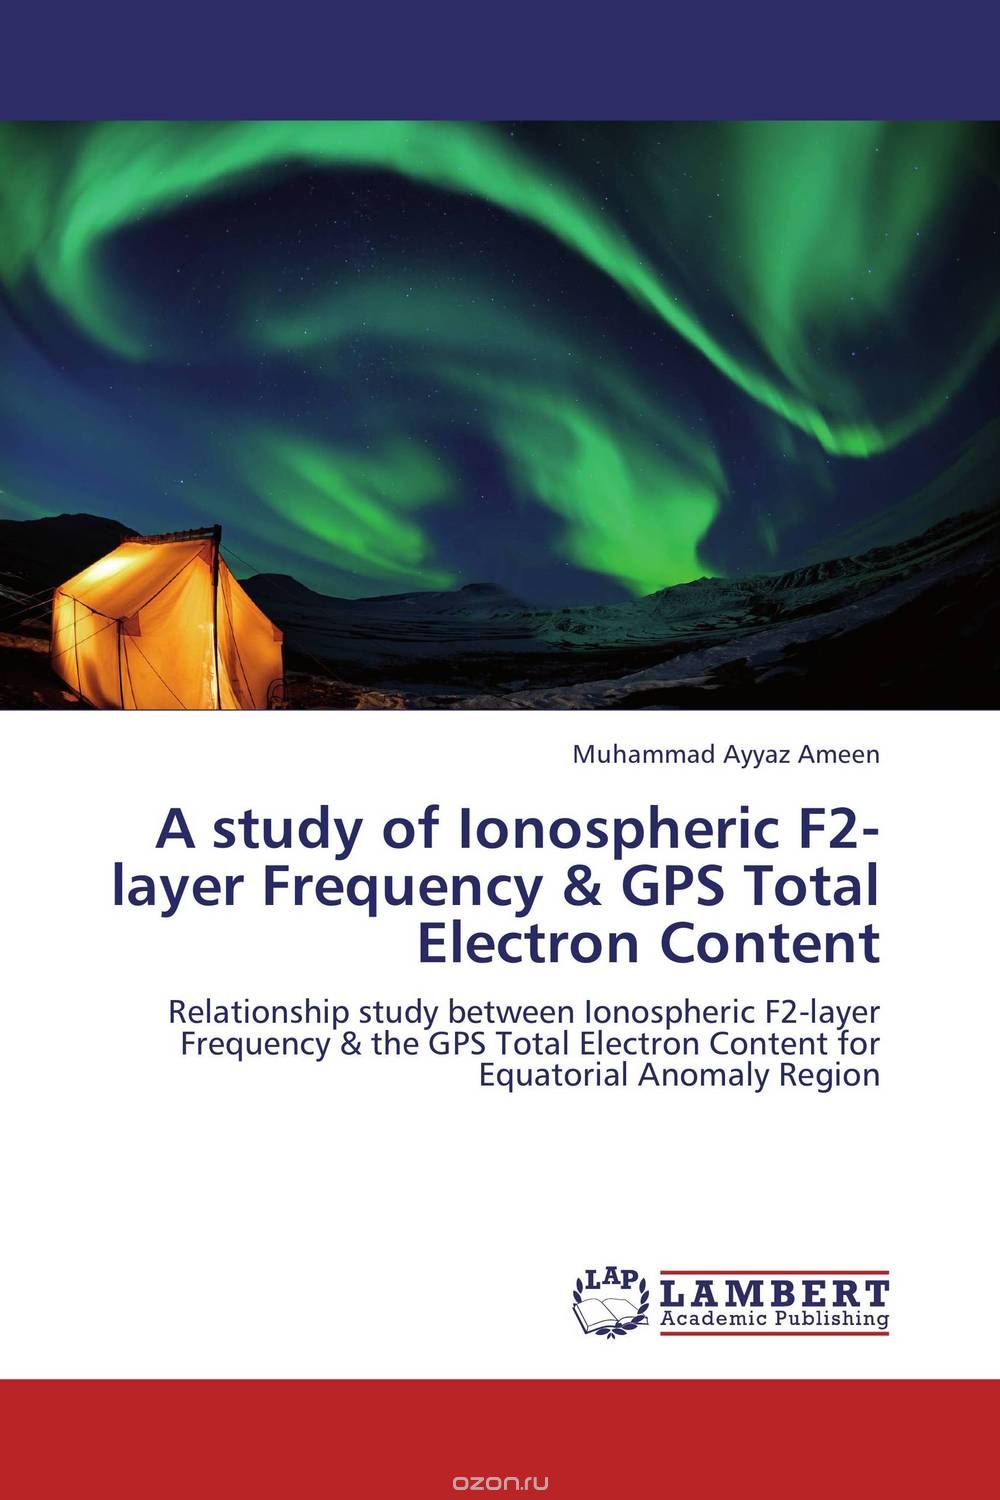 A study of Ionospheric F2-layer Frequency & GPS Total Electron Content